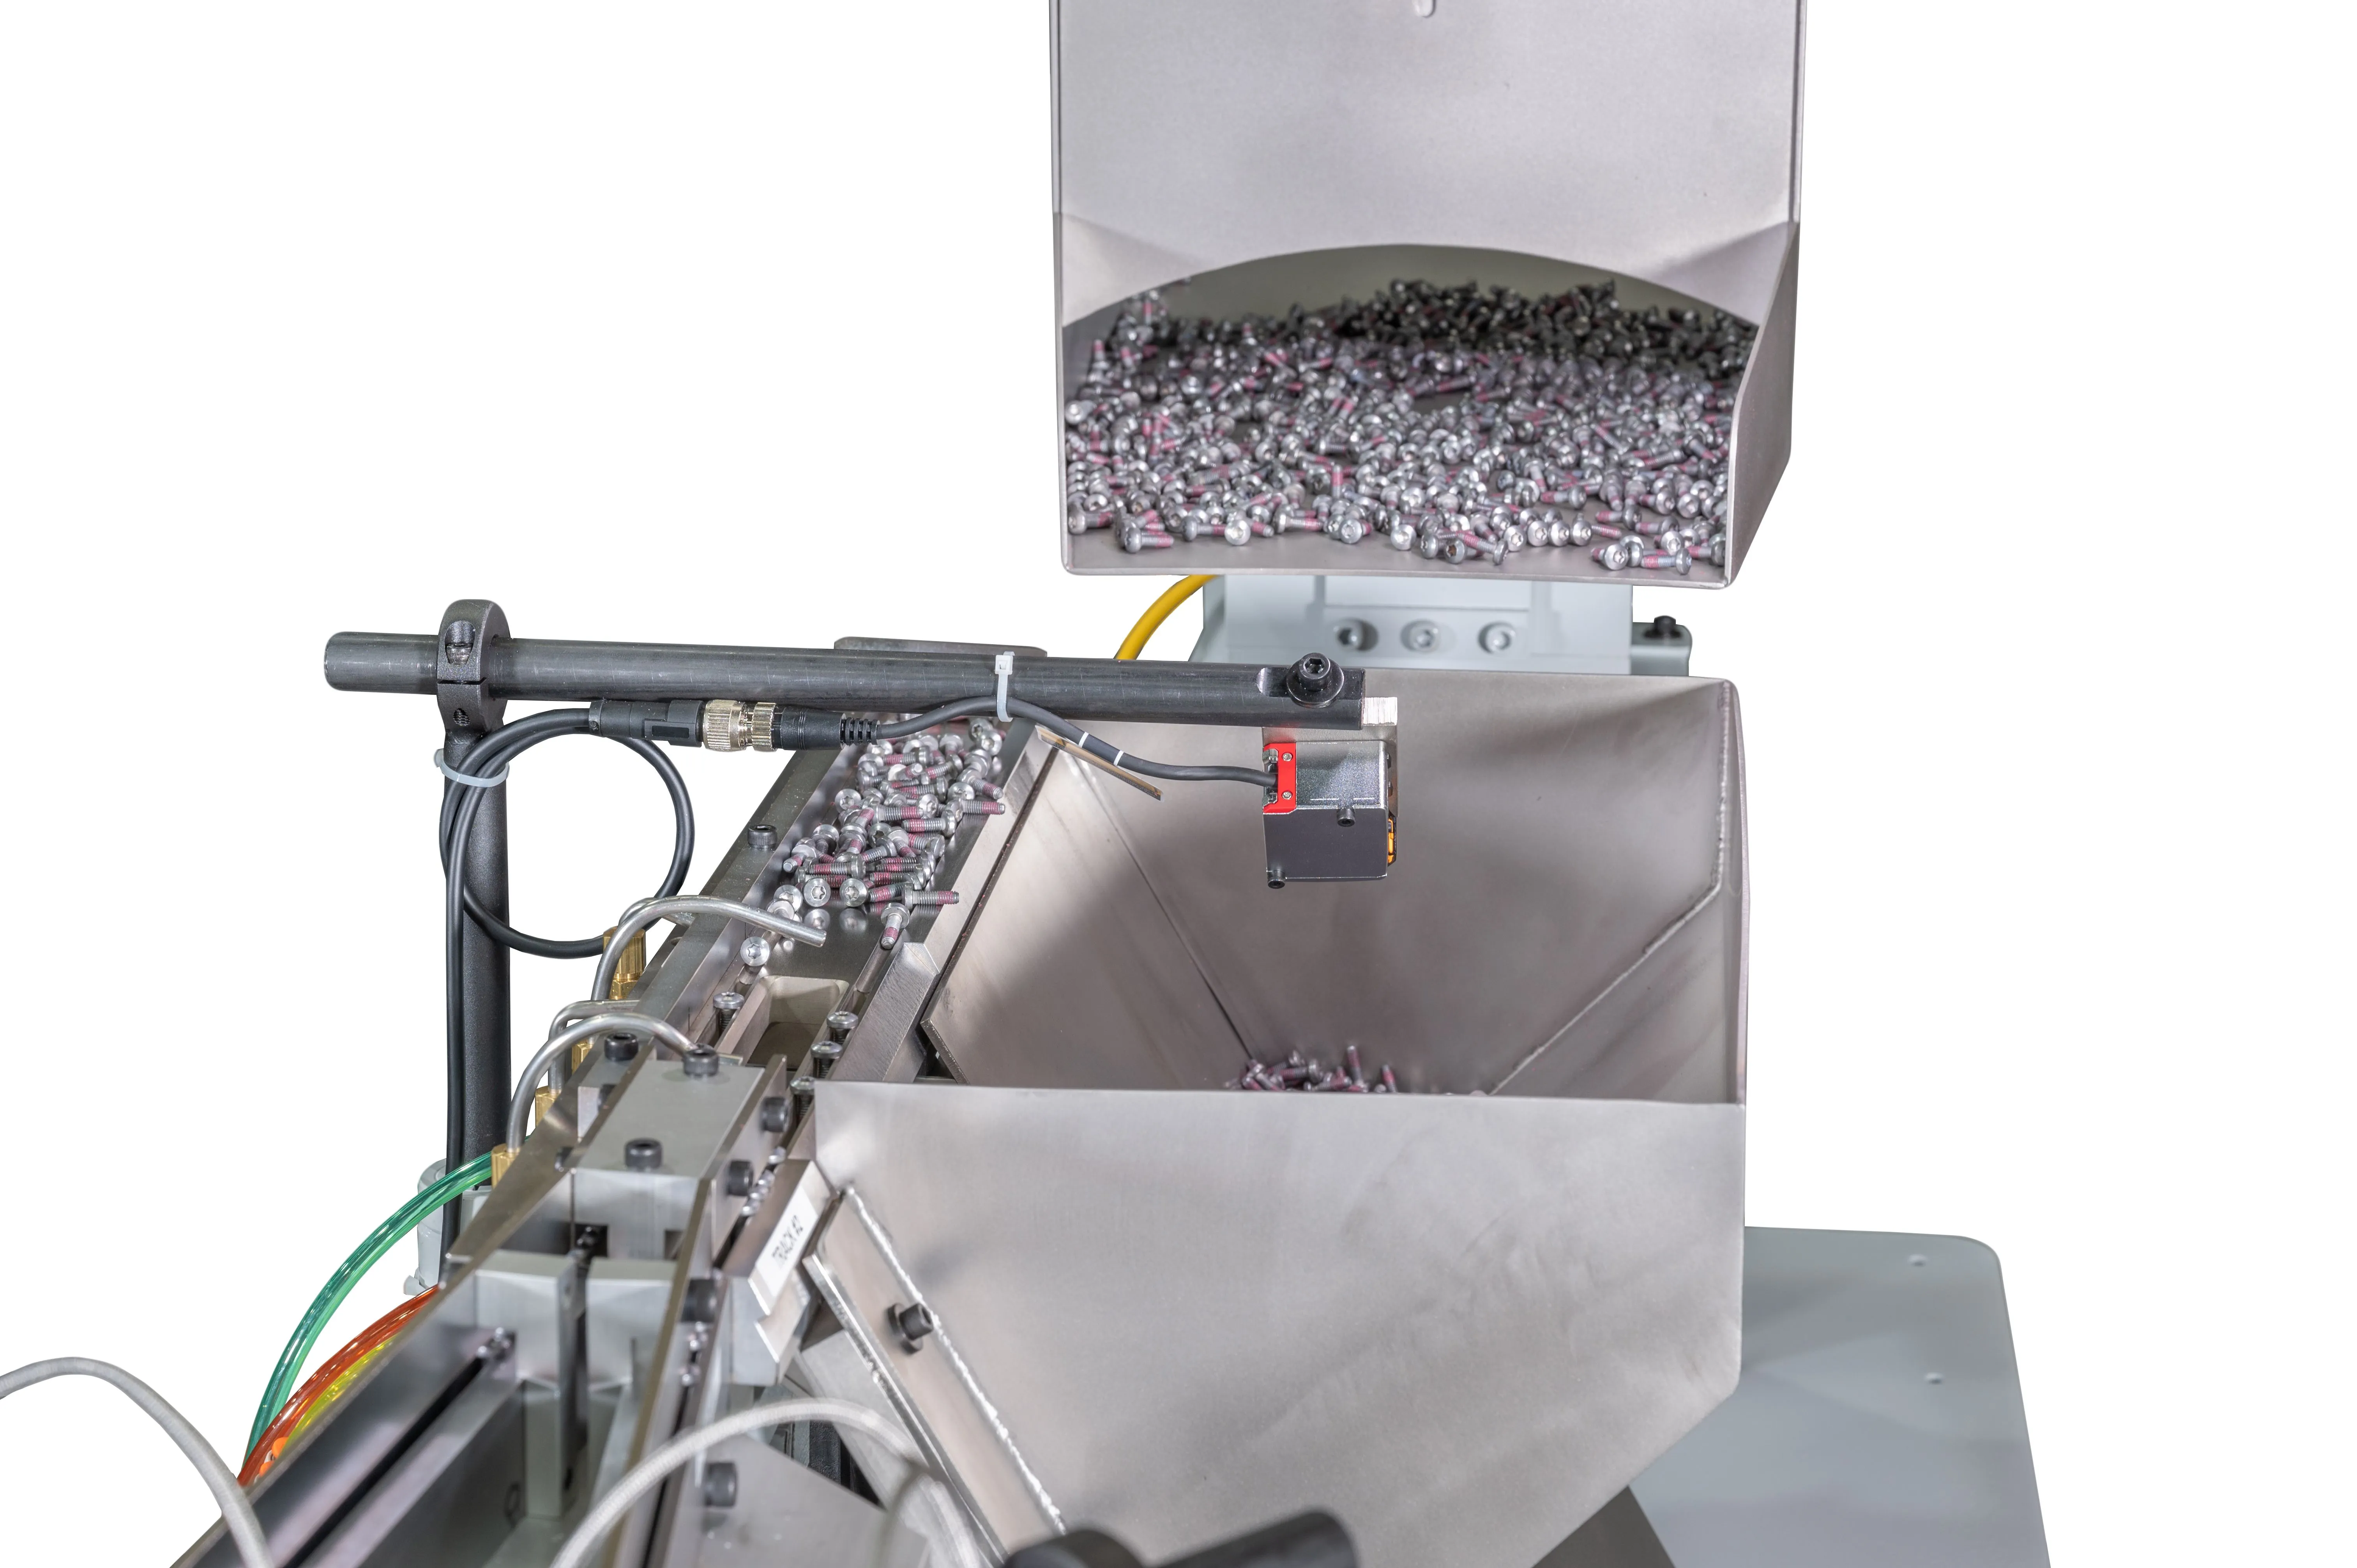 Industrial capsule sorting and counting machine processing pharmaceutical capsules.